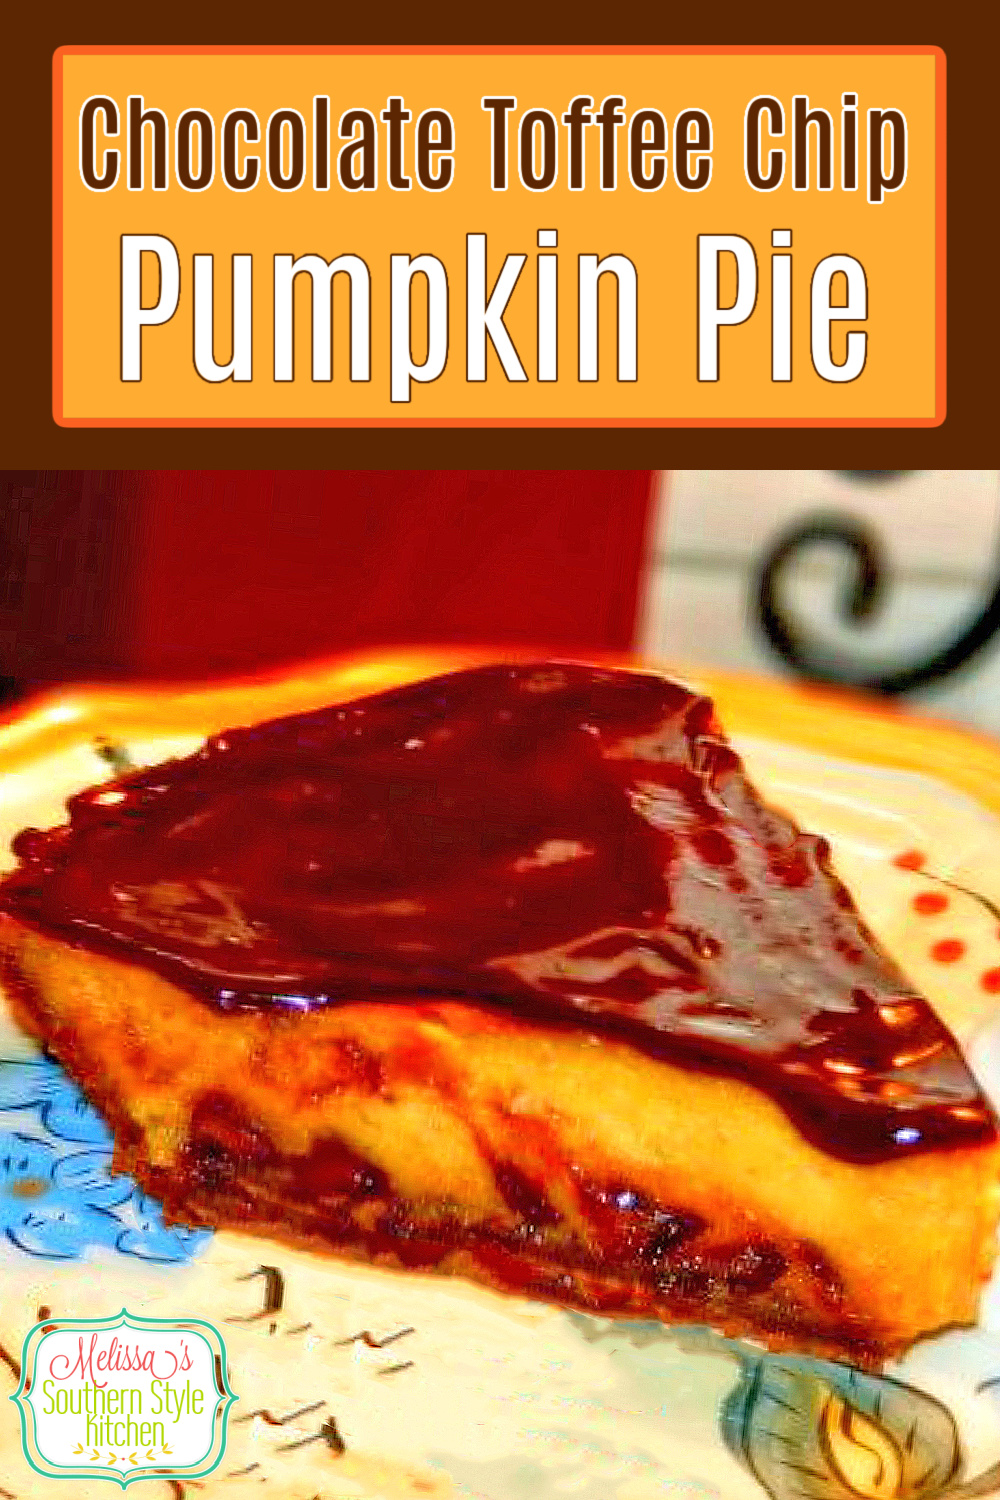 Take pumpkin pie to another level with the addition of chocolate and toffee #pumpkinpie #pumpkinpierecipes #chocolate #toffee #thanksgiving #thanksgivingdesserts #pumpkin #pierecipes #desserts #bestpumpkinpie #southernfood #southernrecipes via @melissasssk